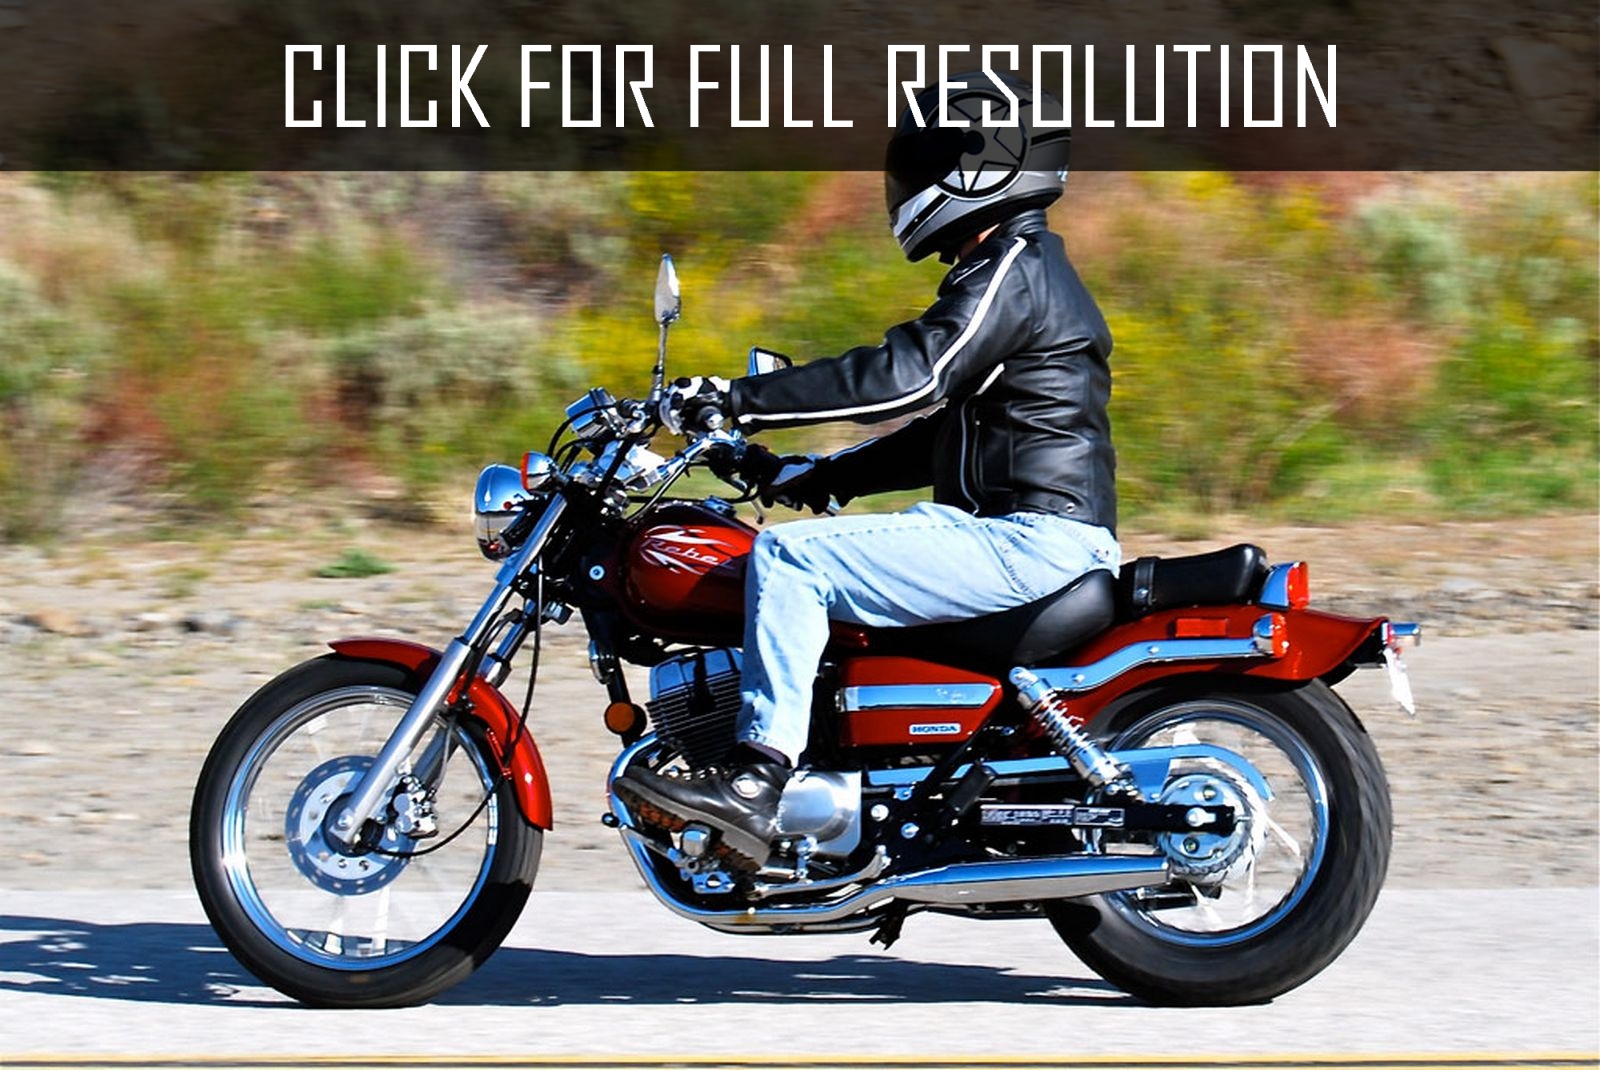 2006 Honda Rebel 250 - news, reviews, msrp, ratings with amazing images